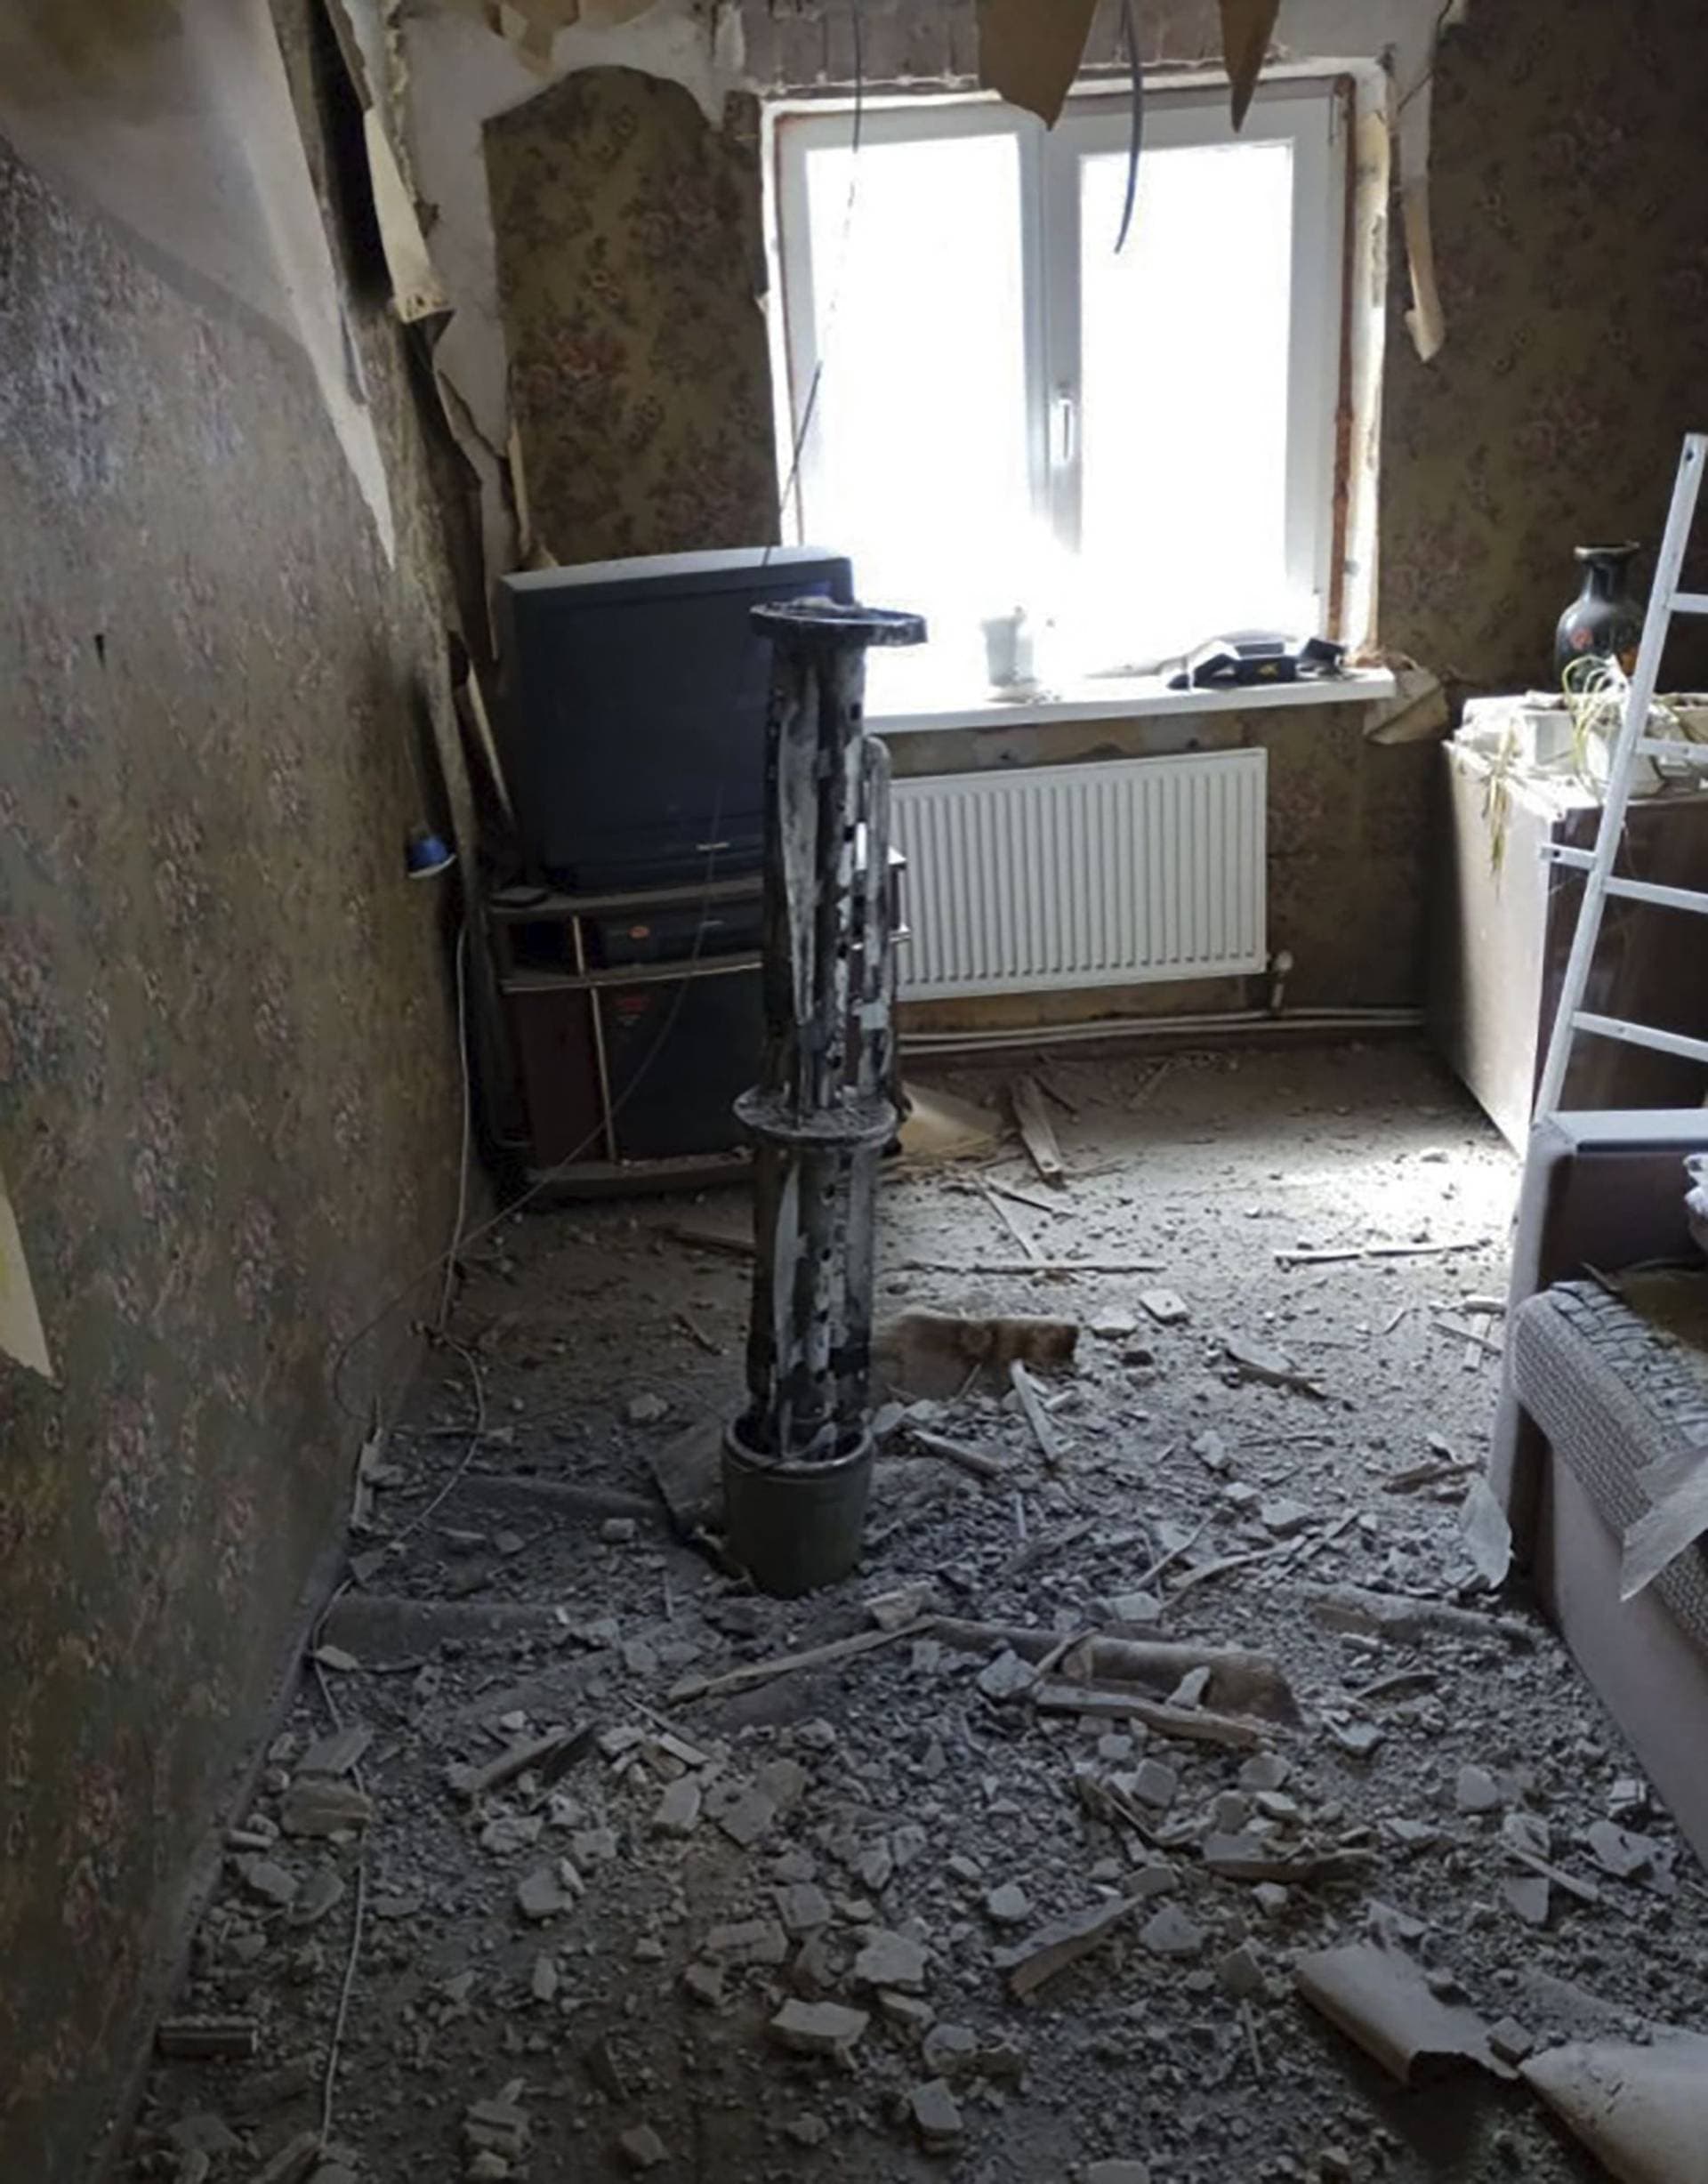 fragments of a Russian missile are seen inside a room of an apartment building in Kostiantynivka